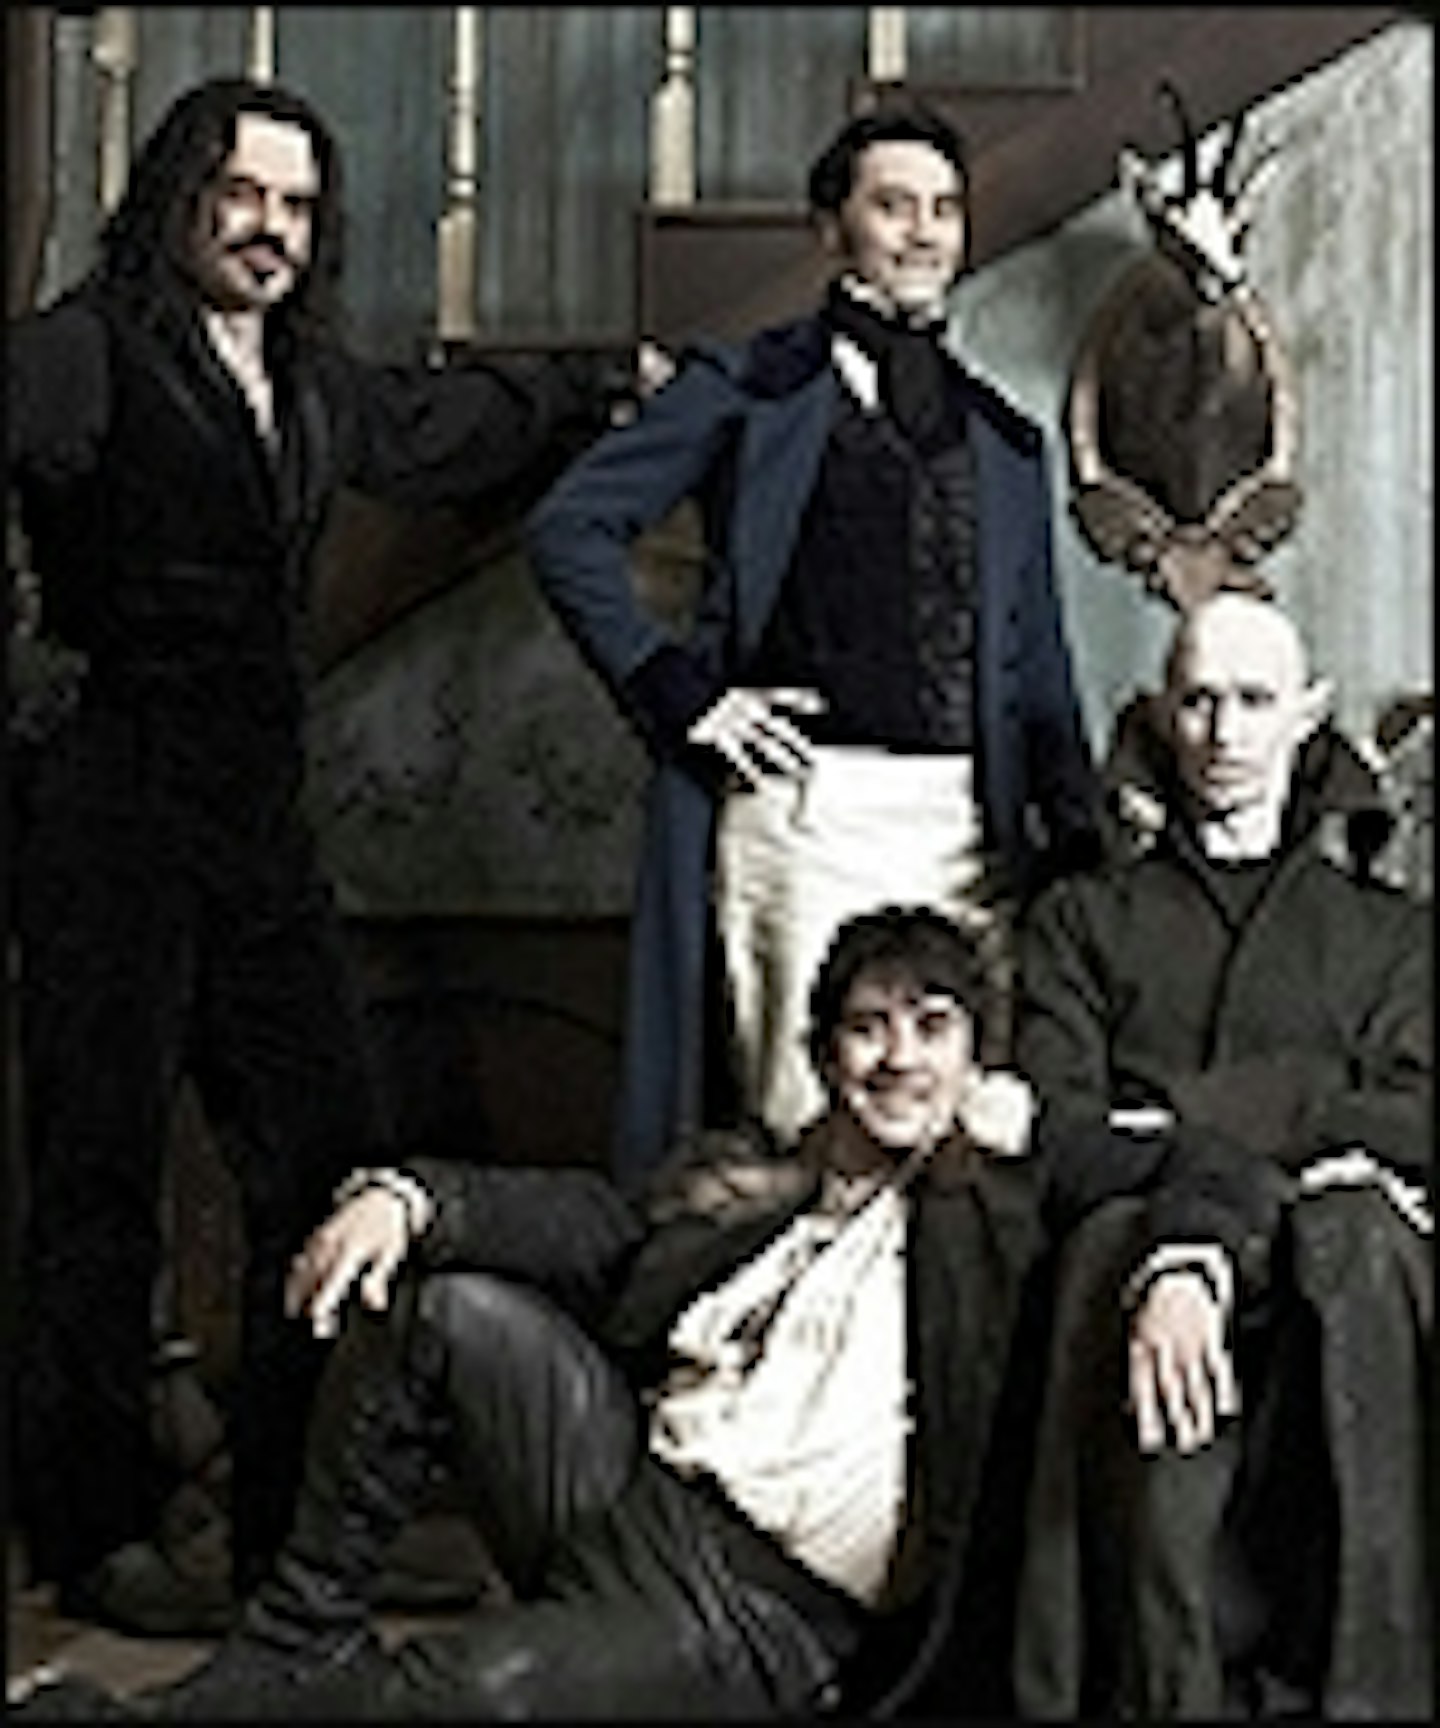 New Trailer For Jemaine Clement's What We Do In The Shadows 